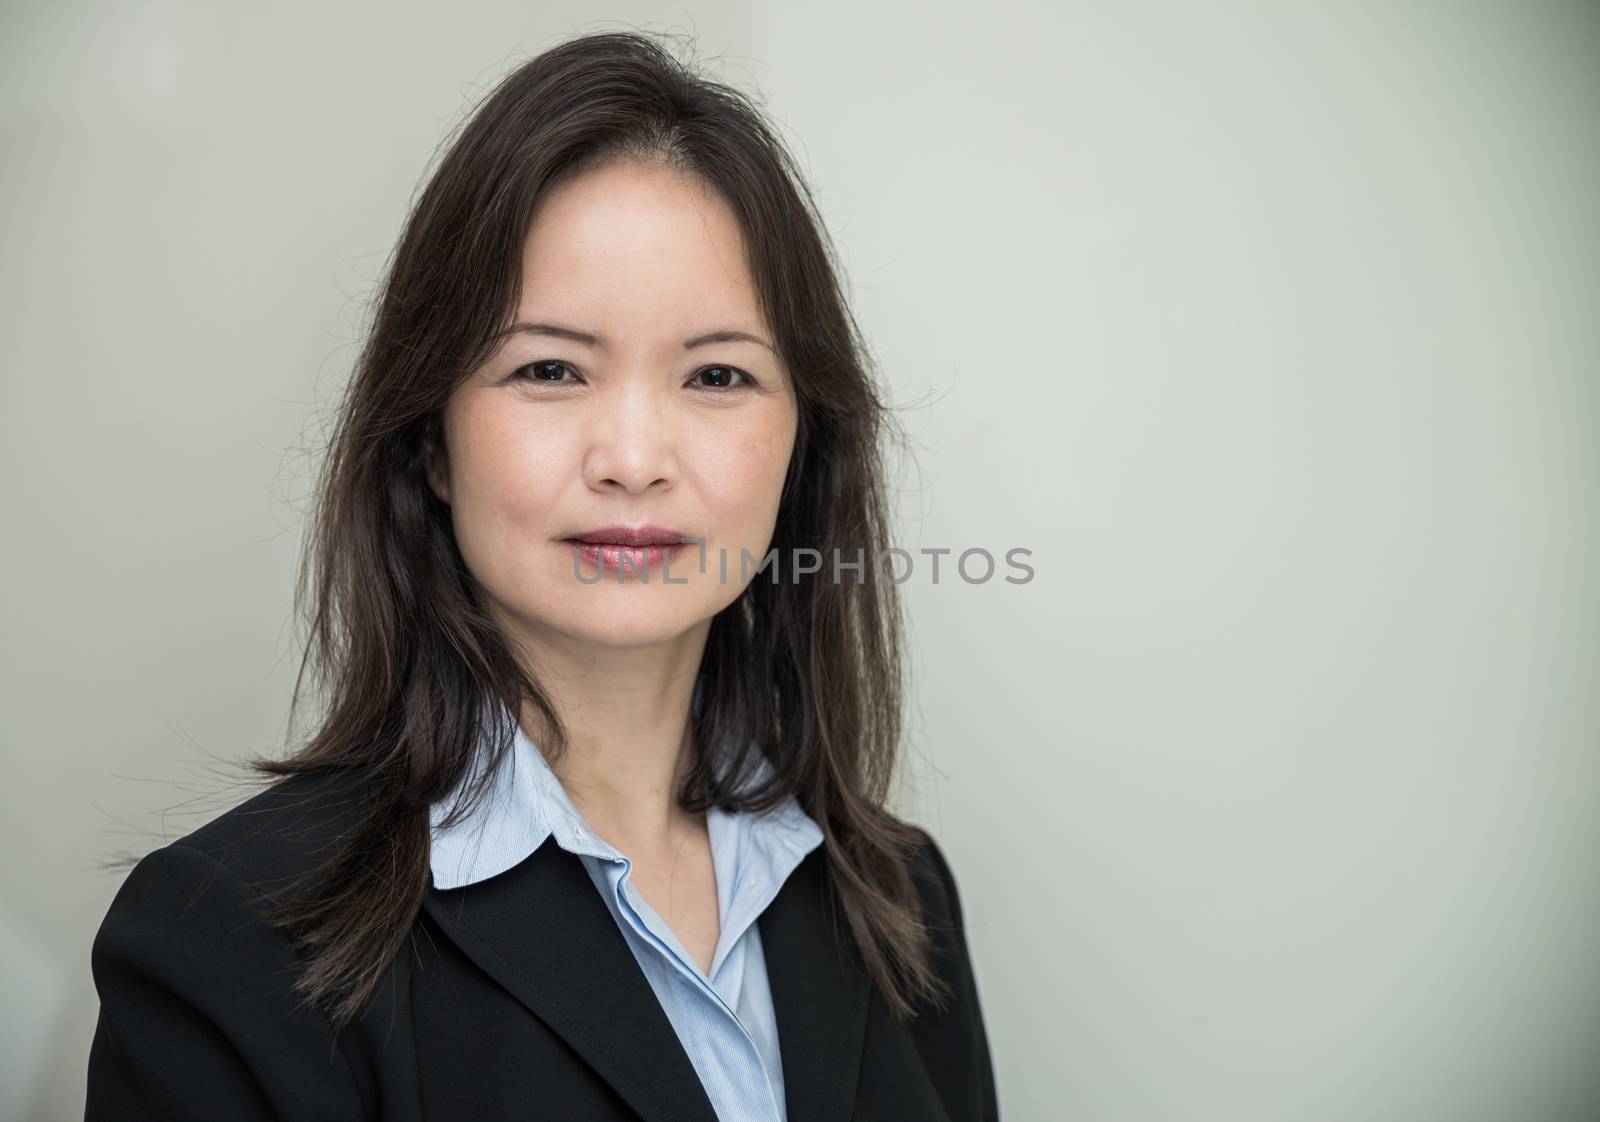 Portrait of professional woman in business suit smiling with grey background 